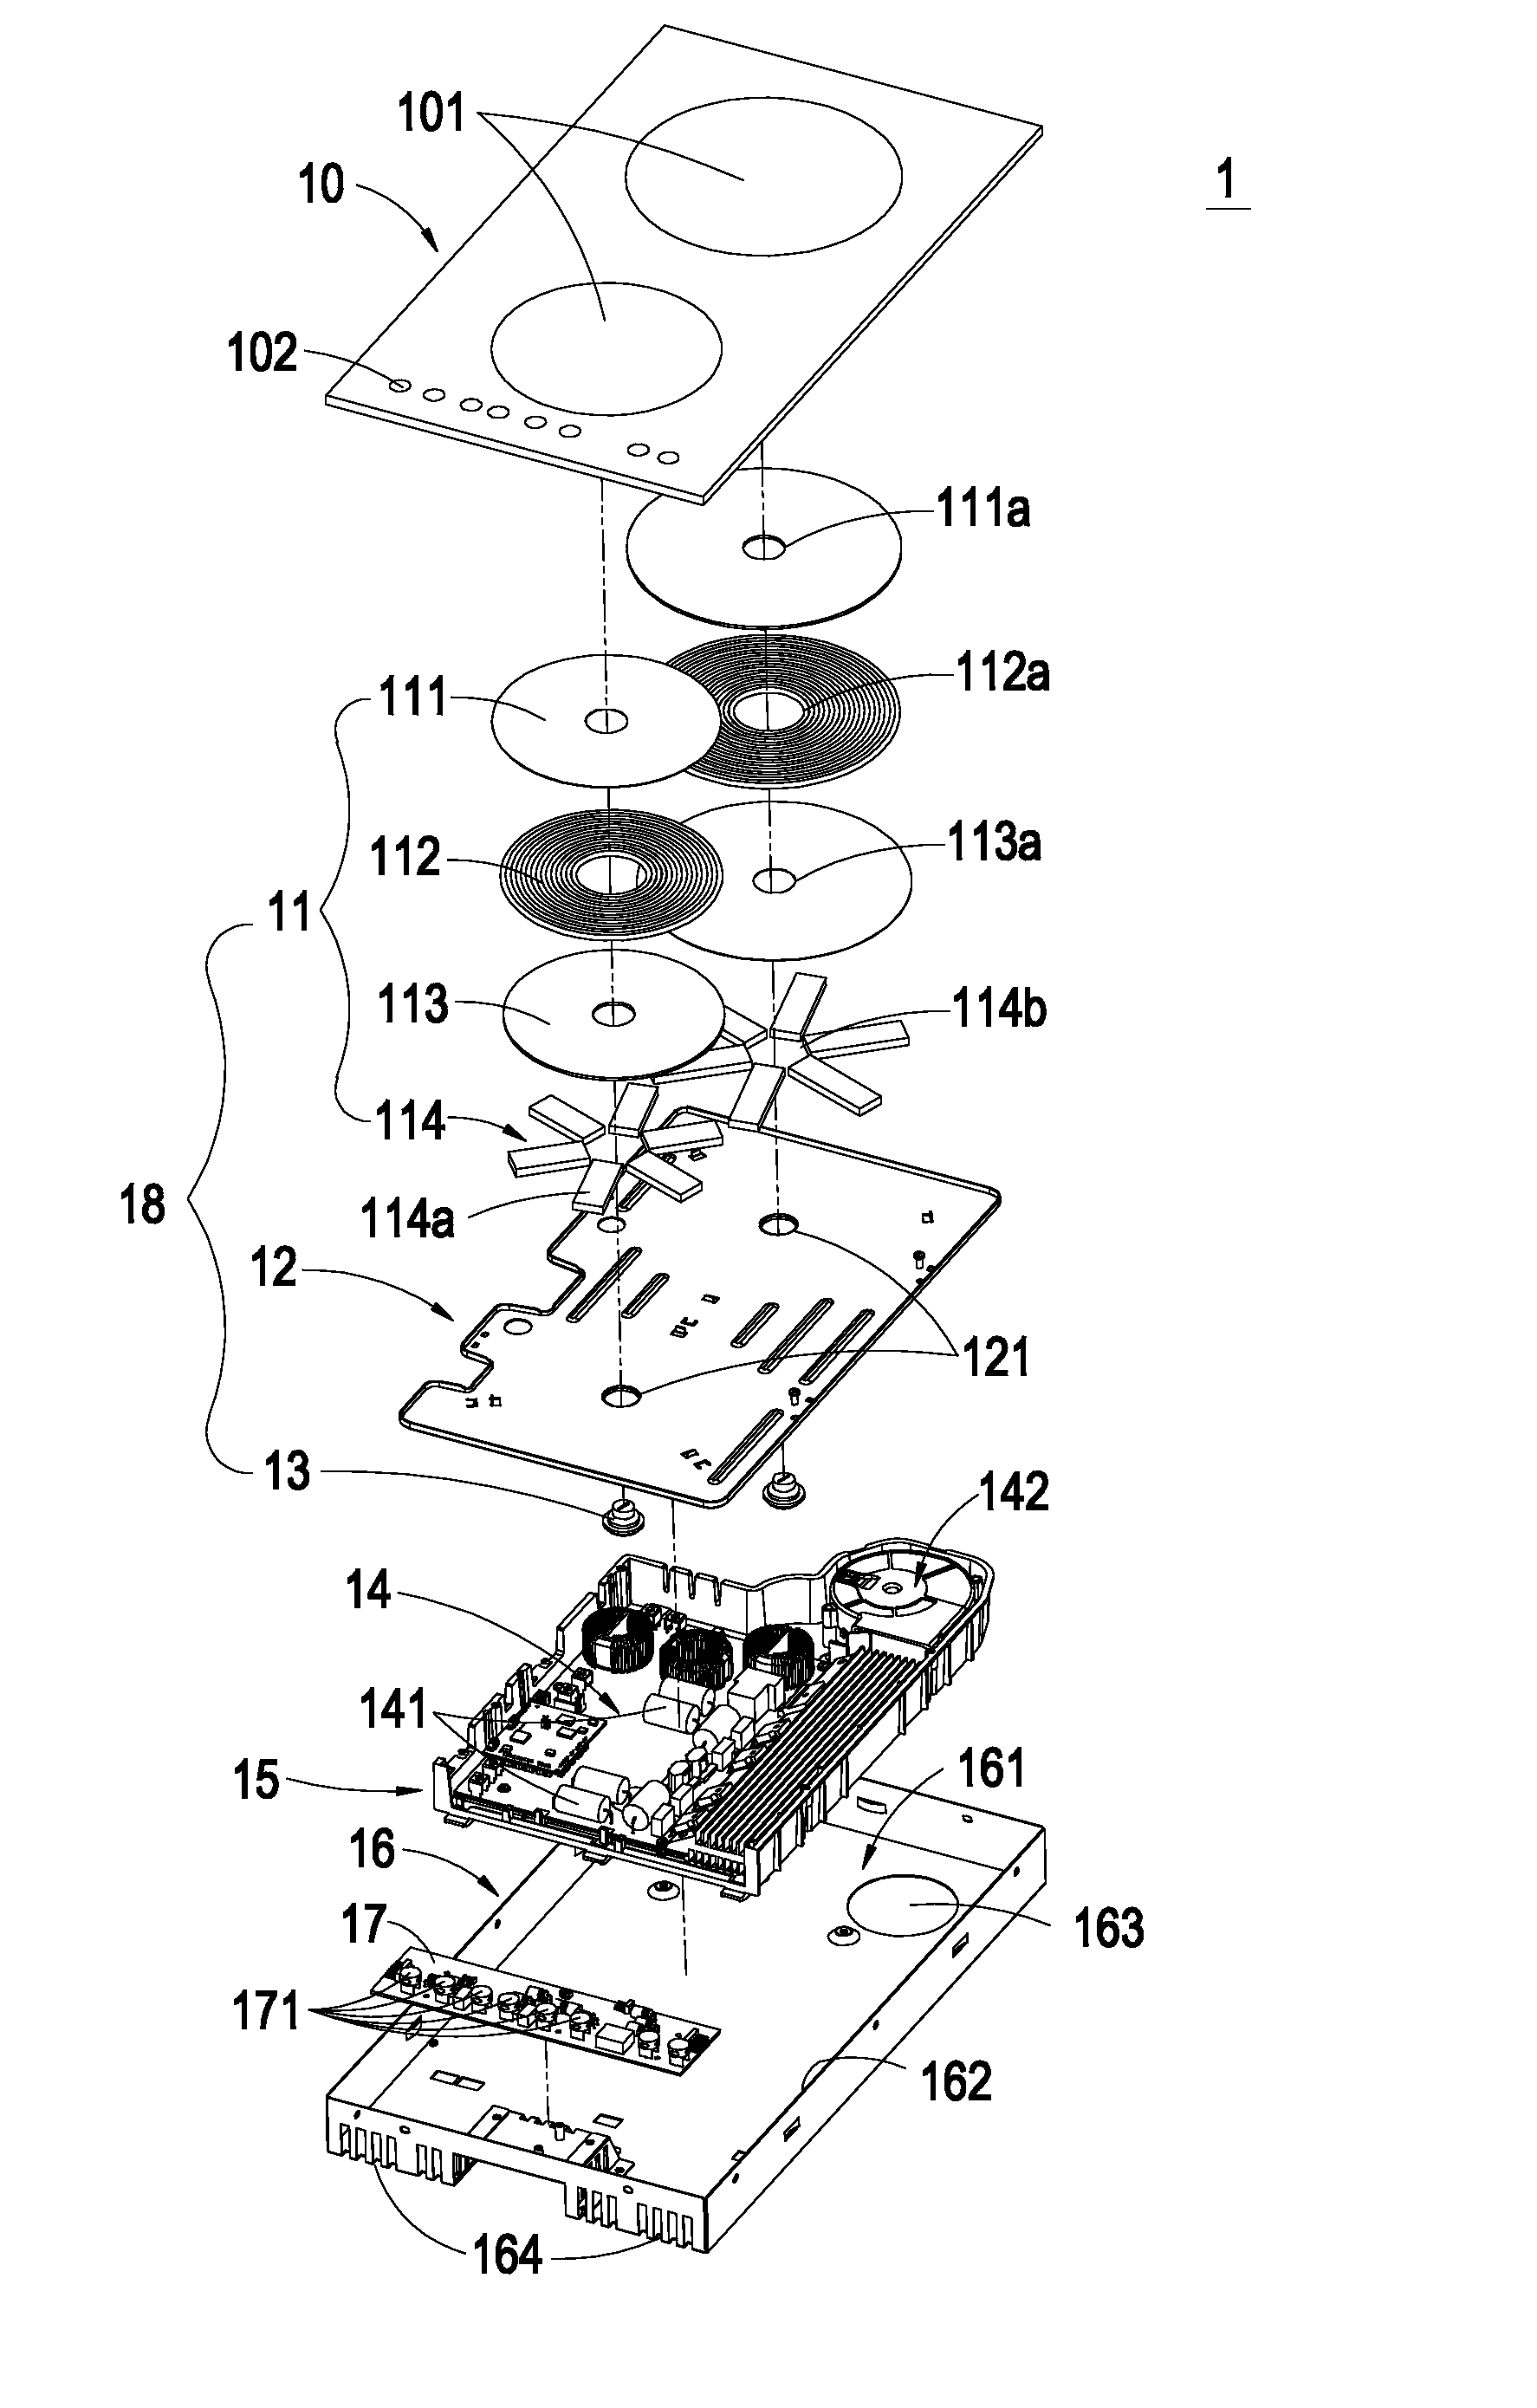 Electromagnetic module of electronic apparatus and manufacturing process thereof